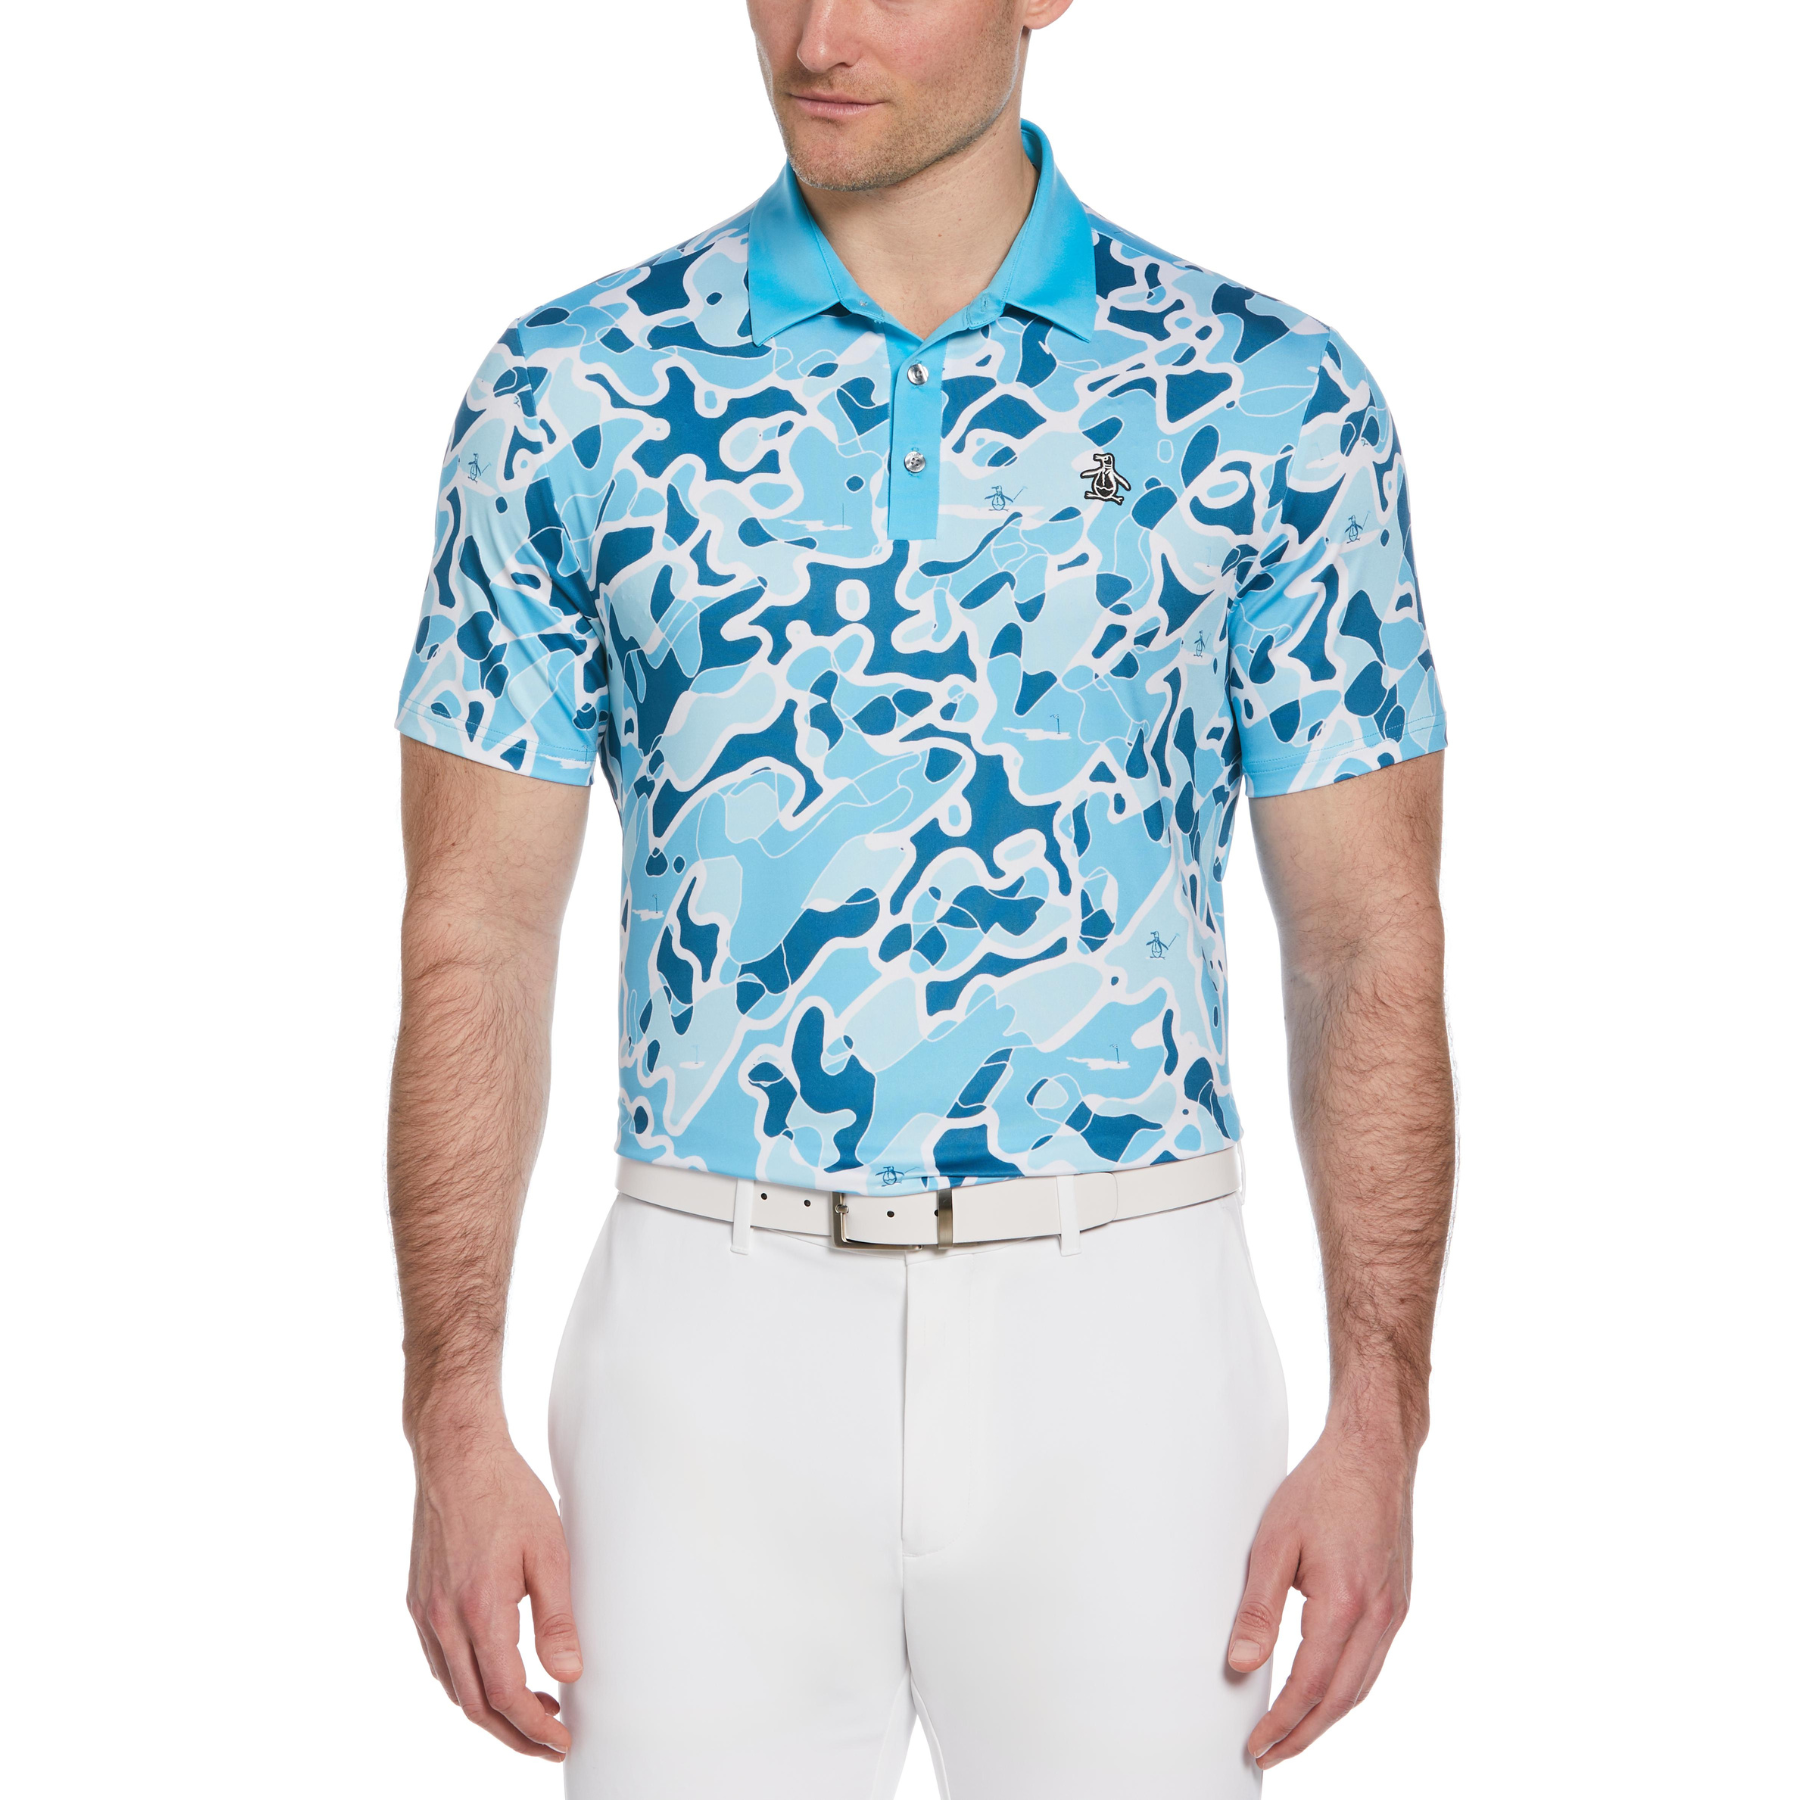 View Bunker Print Short Sleeve Golf Polo Shirt In Blue Atoll information